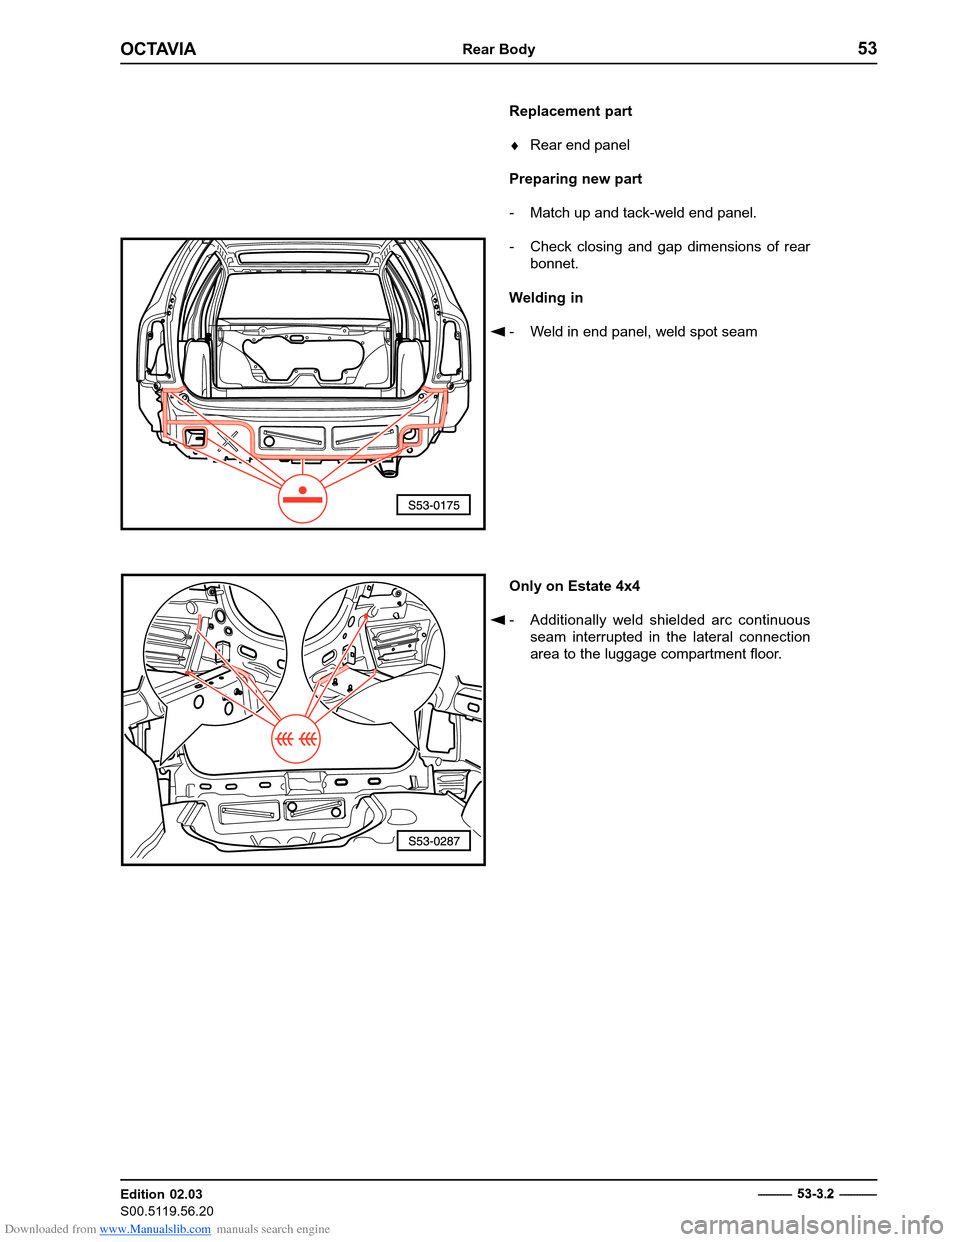 SKODA OCTAVIA 1997 1.G / (1U) Body Repairs Workshop Manual Downloaded from www.Manualslib.com manuals search engine OCTAVIARear Body53
Edition 02.03 
S00.5119.56.20
Replacement part �Rear end panel
Preparing new part 
- Match up and tack-weld end panel. 
- Ch